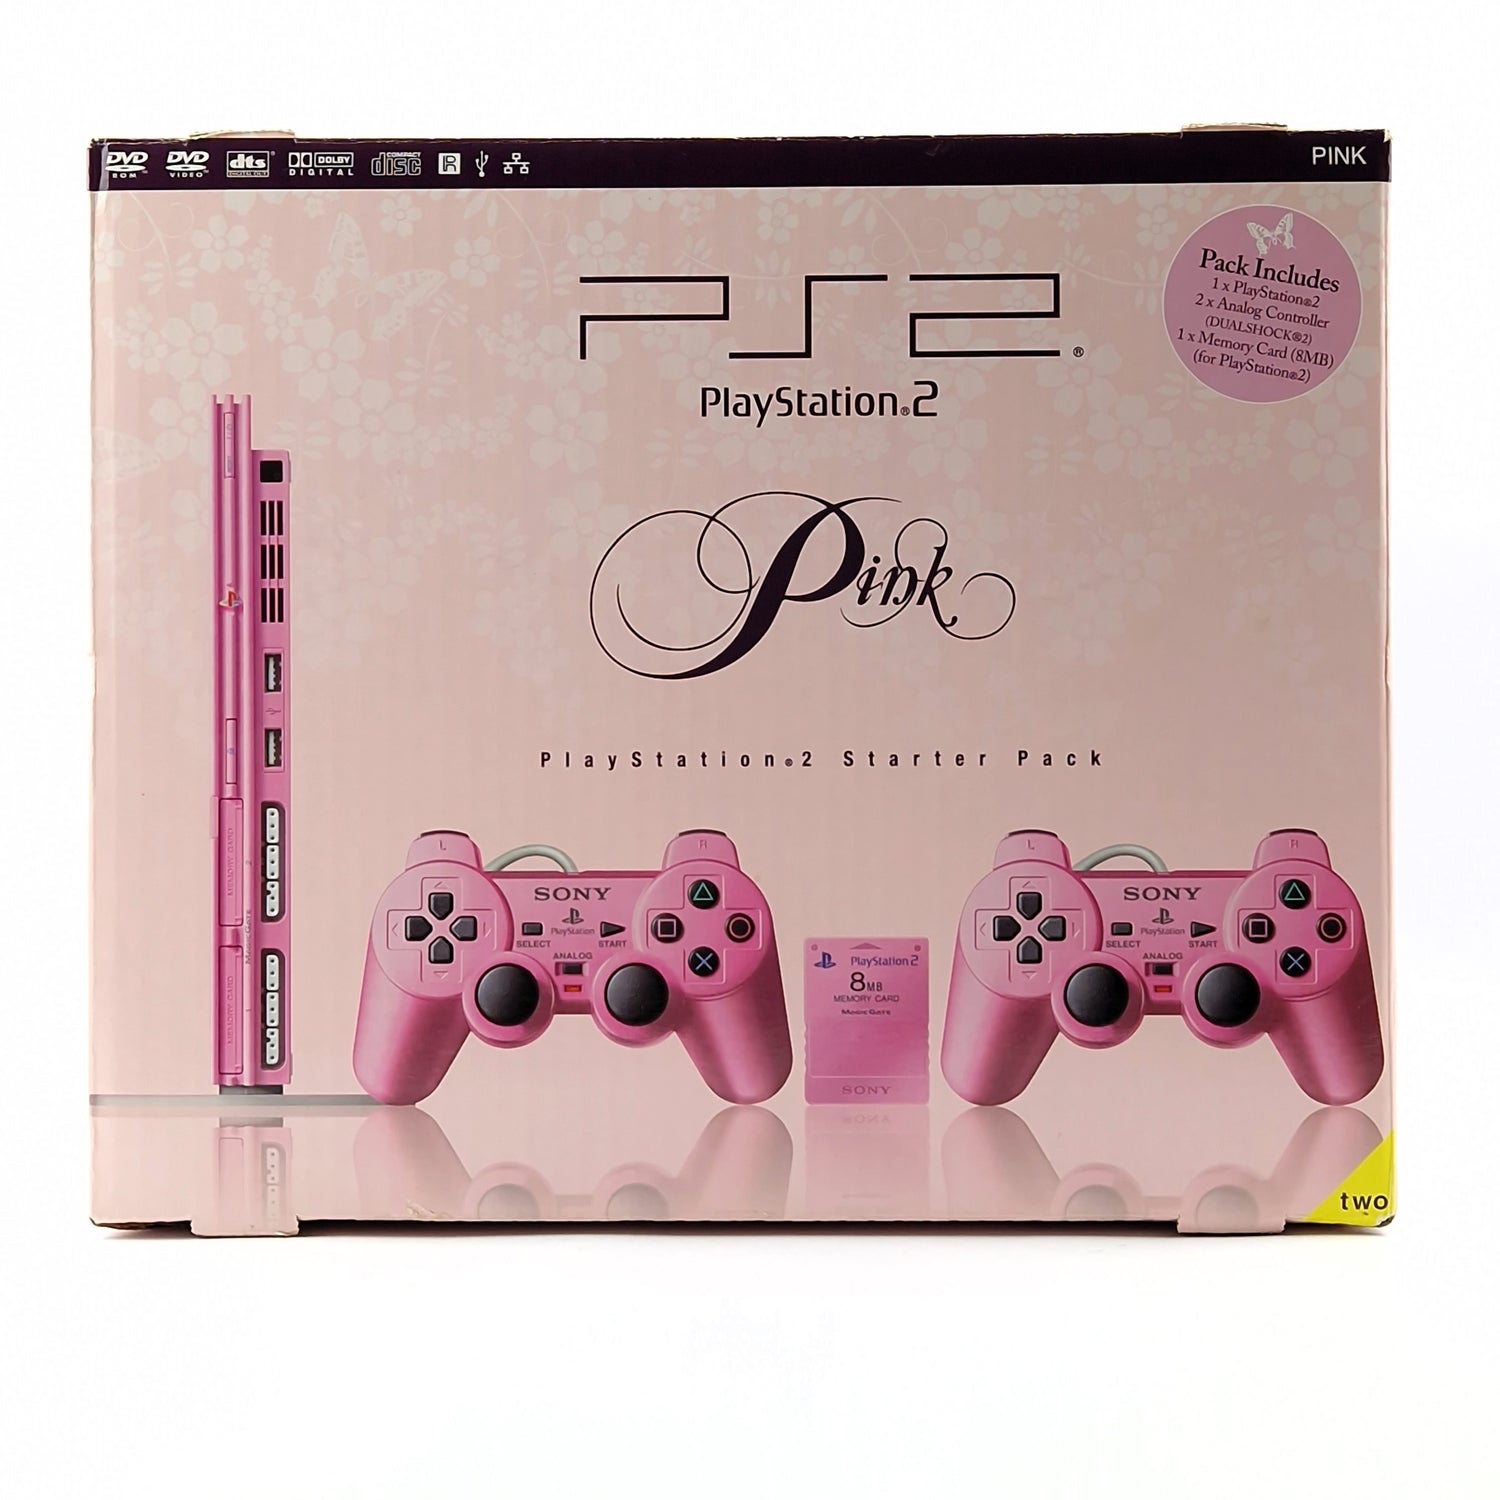 Playstation 2 Console: PS2 Starter Pack - Pink Pink / PS2 OVP PAL Console